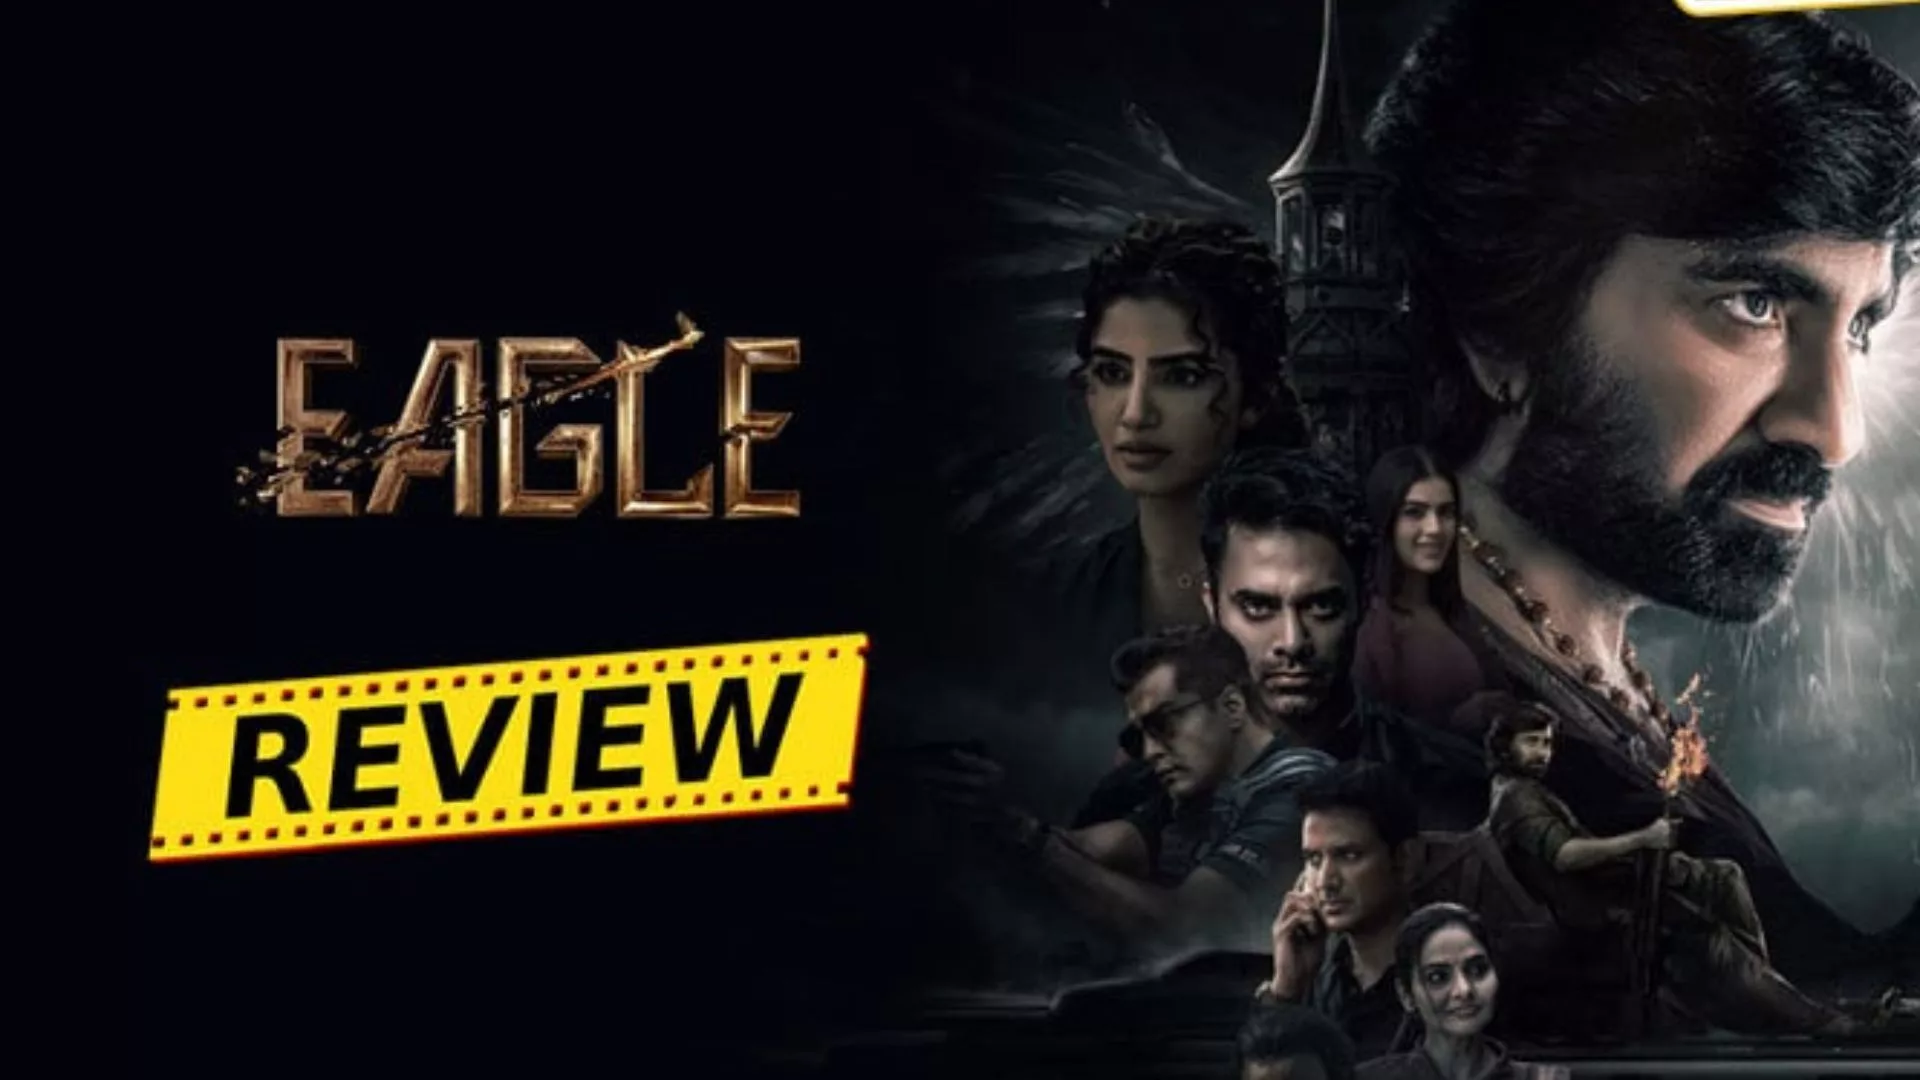 Eagle Movie Review and Rating